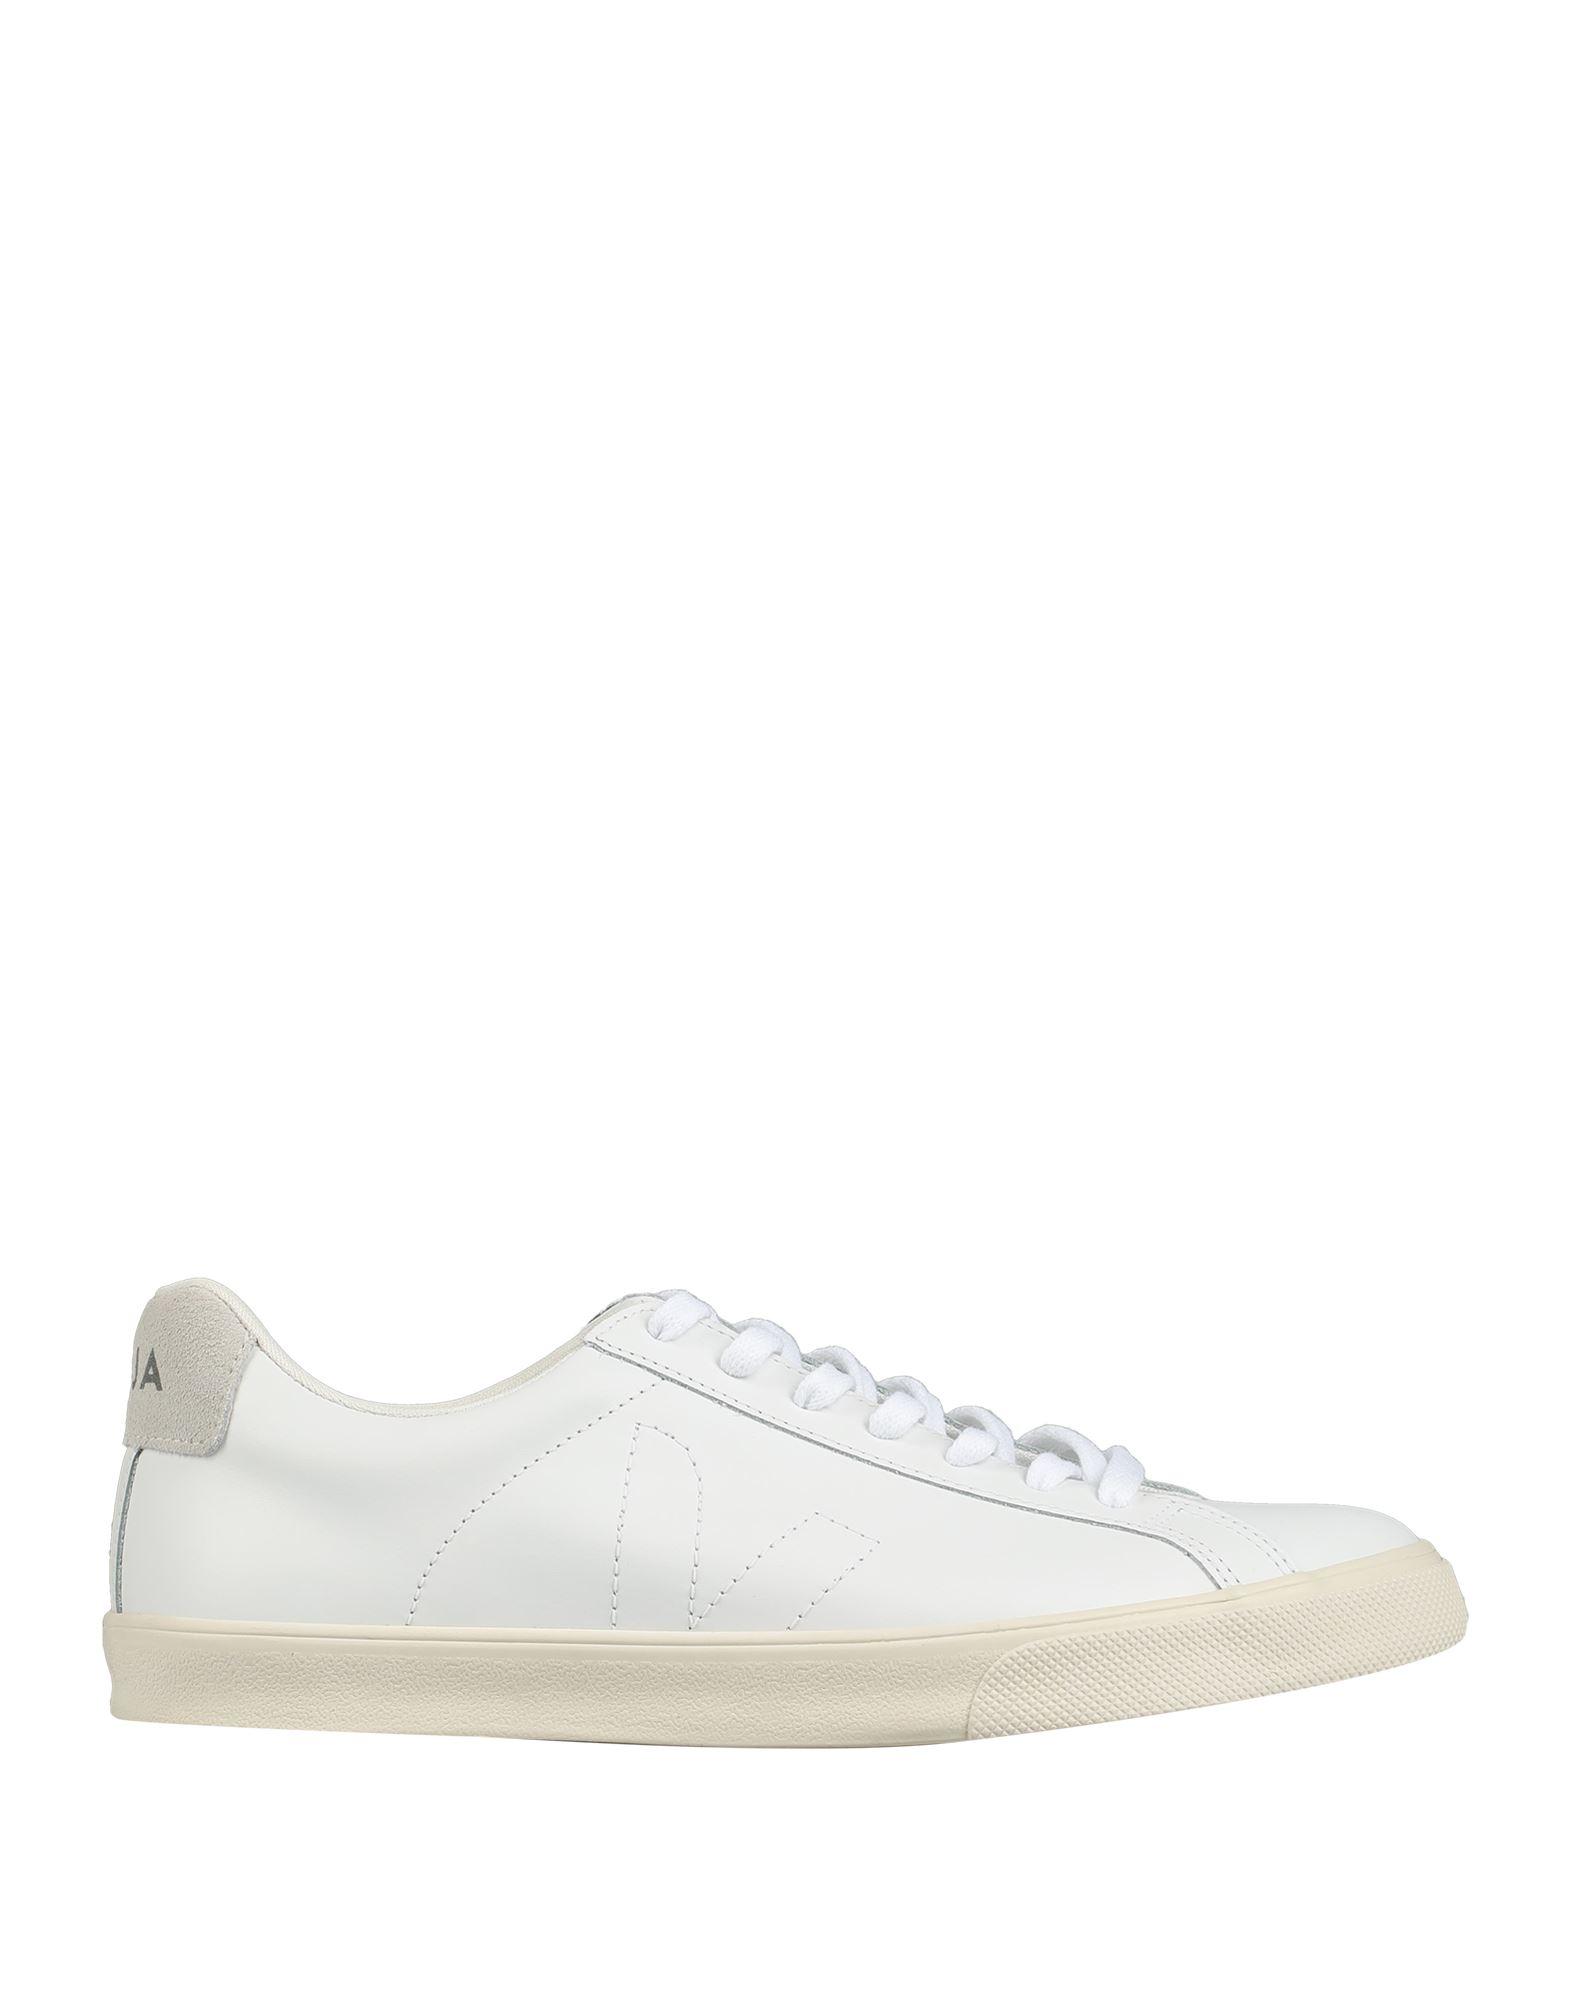 Veja Leather Trainers in White | Lyst